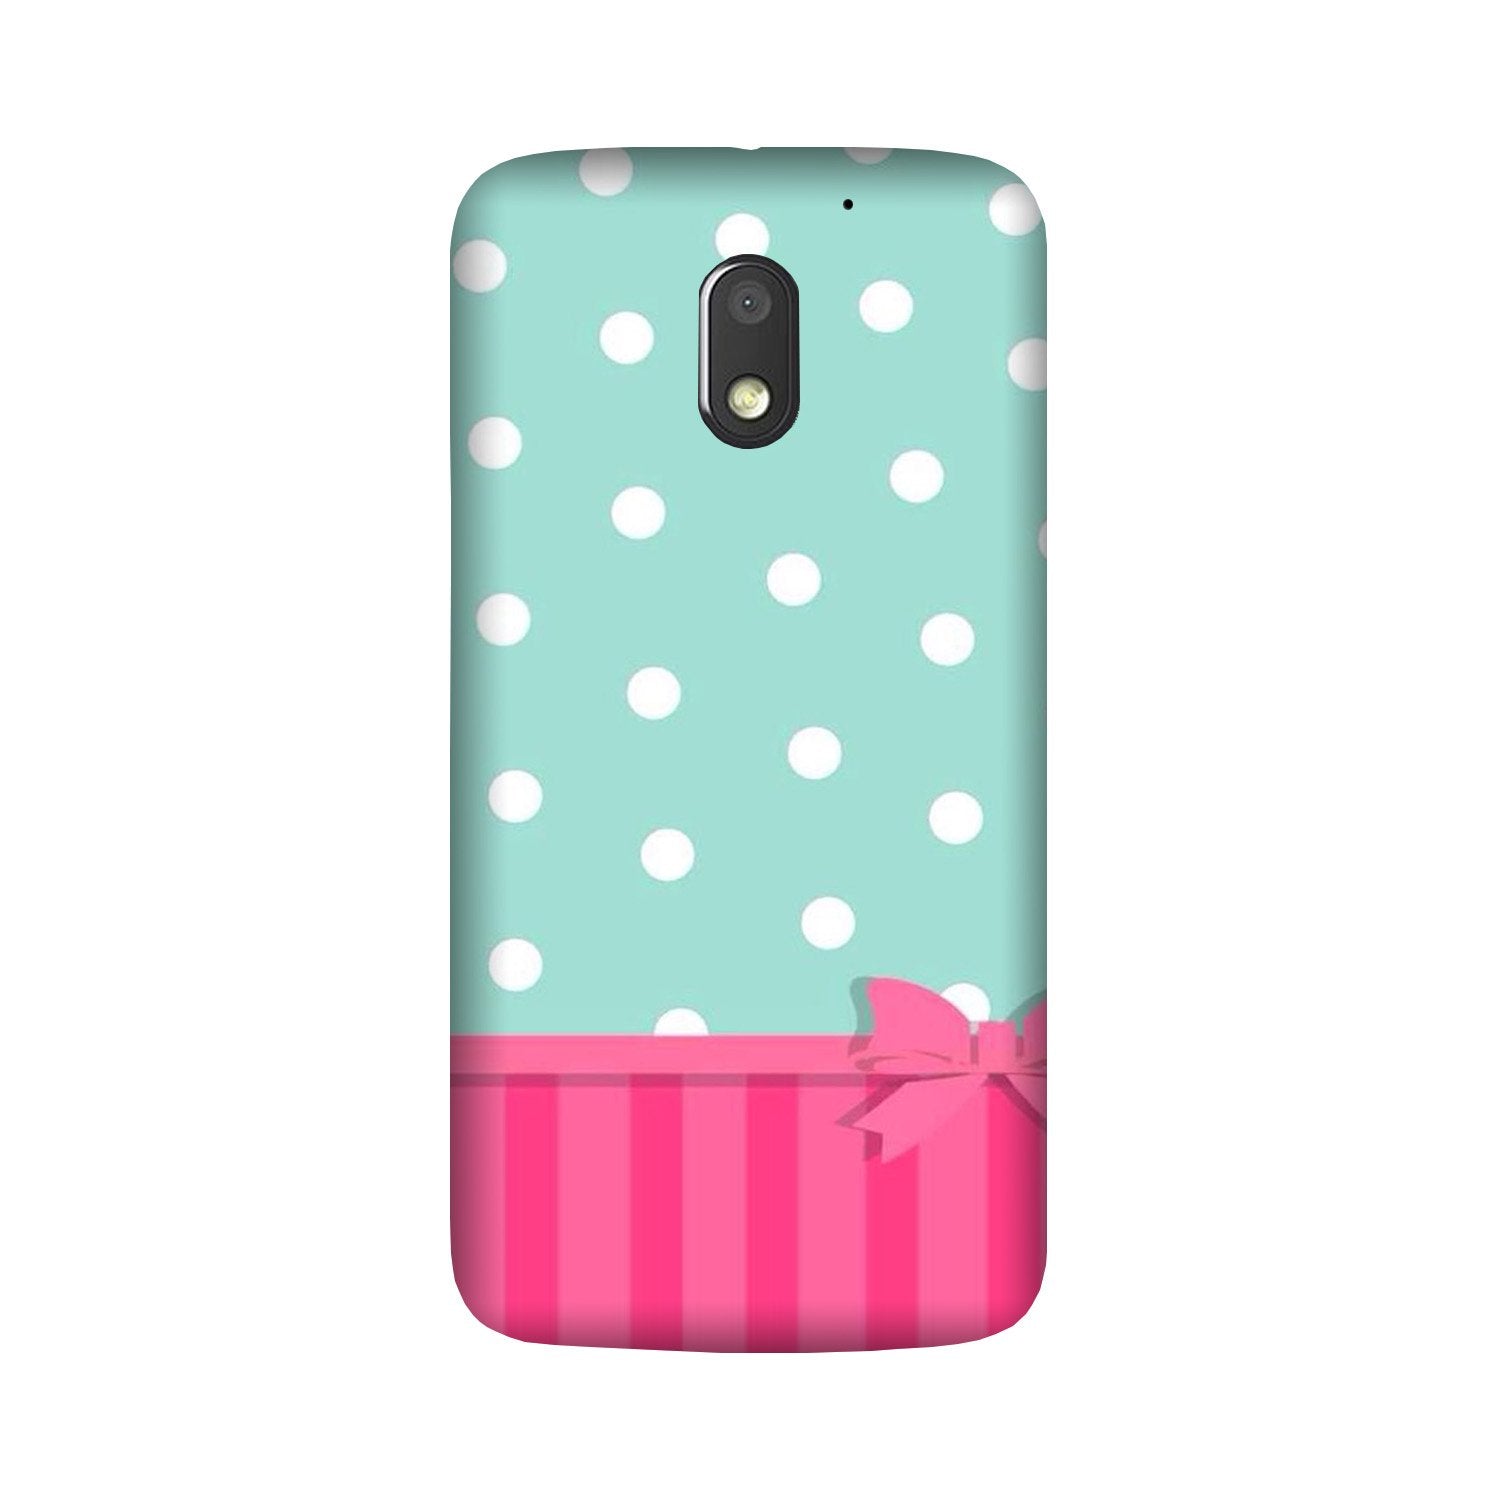 Gift Wrap Case for Moto G4 Play